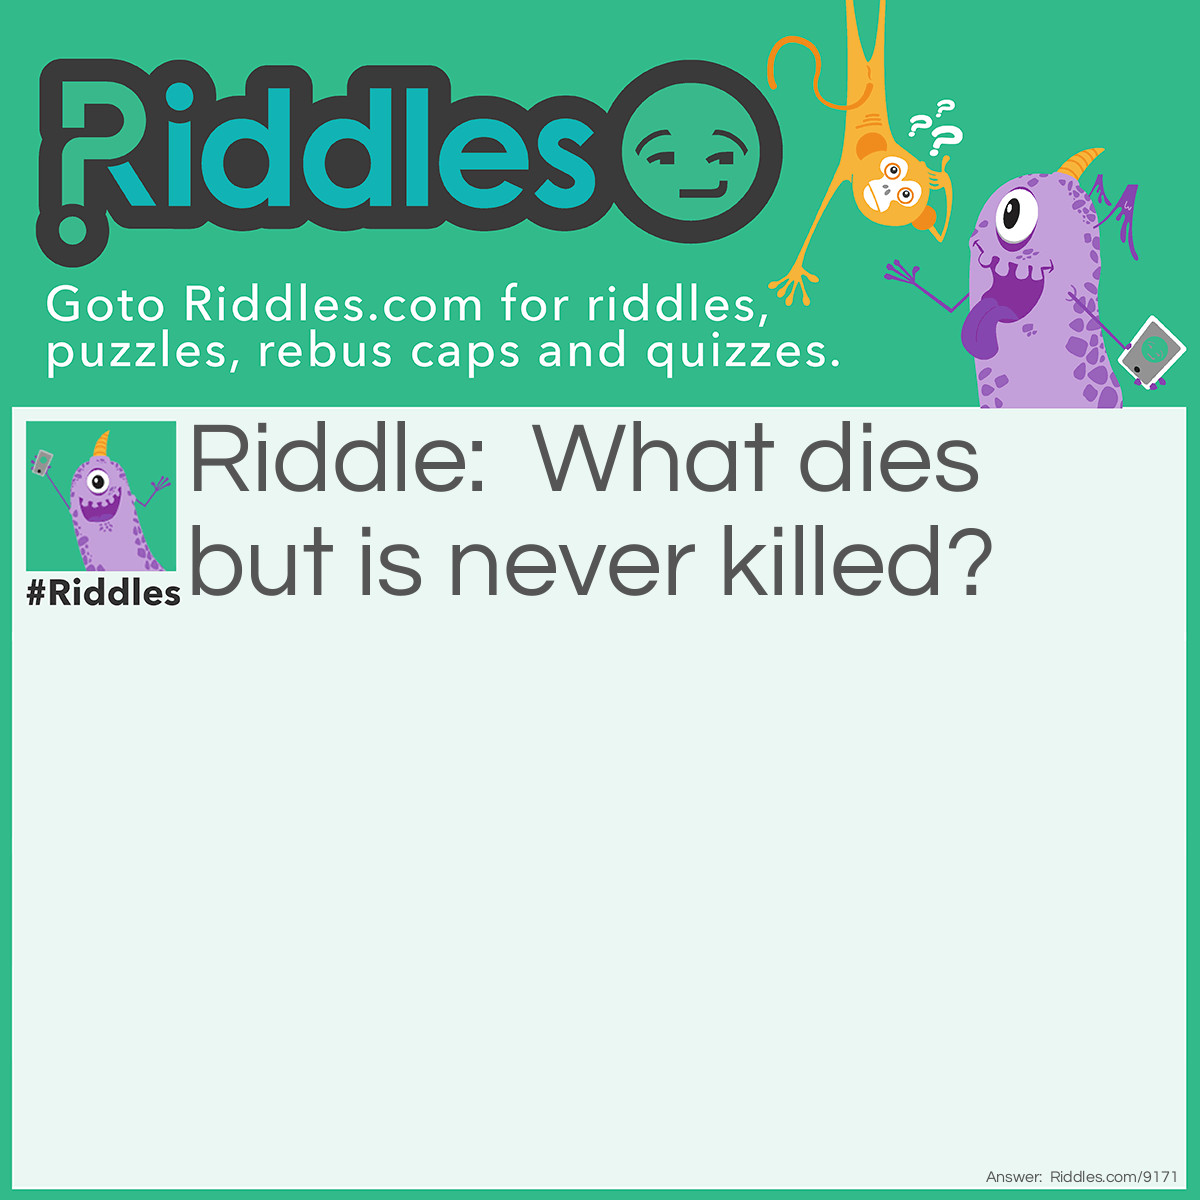 Riddle: What dies but is never killed? Answer: A bad joke.